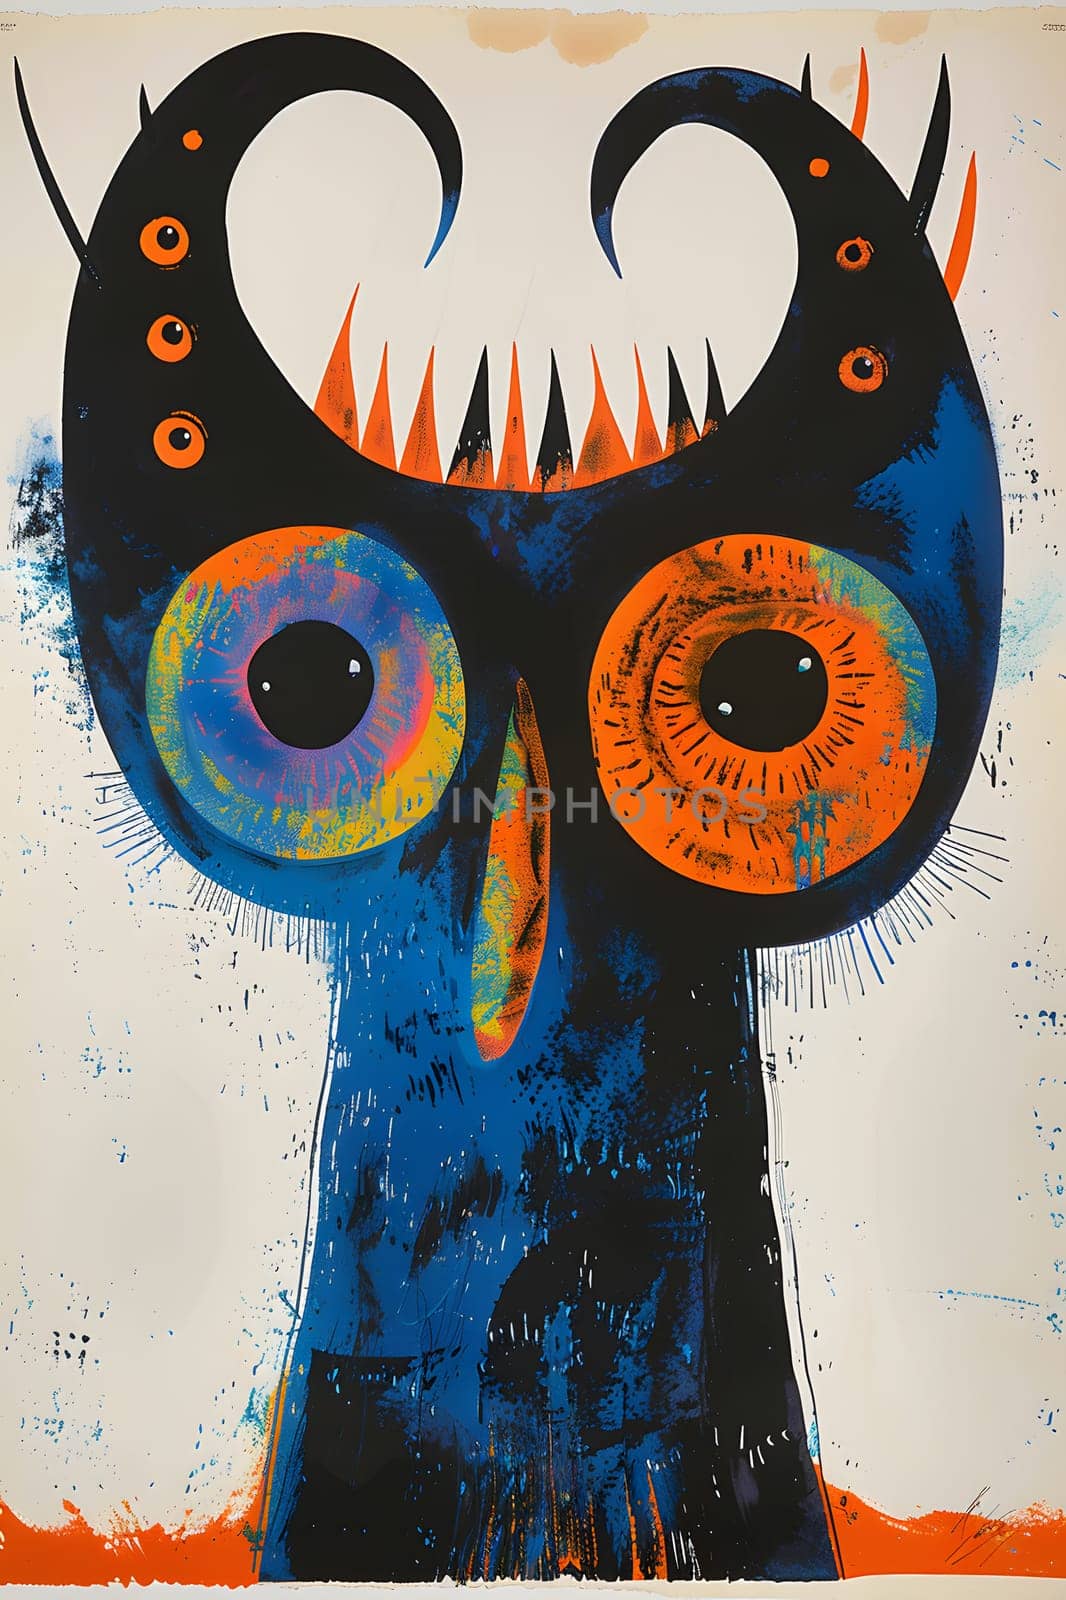 A creative art painting of an owllike blue monster with orange eyes and long eyelashes. The detailed illustration features a birdlike beak and vibrant colors